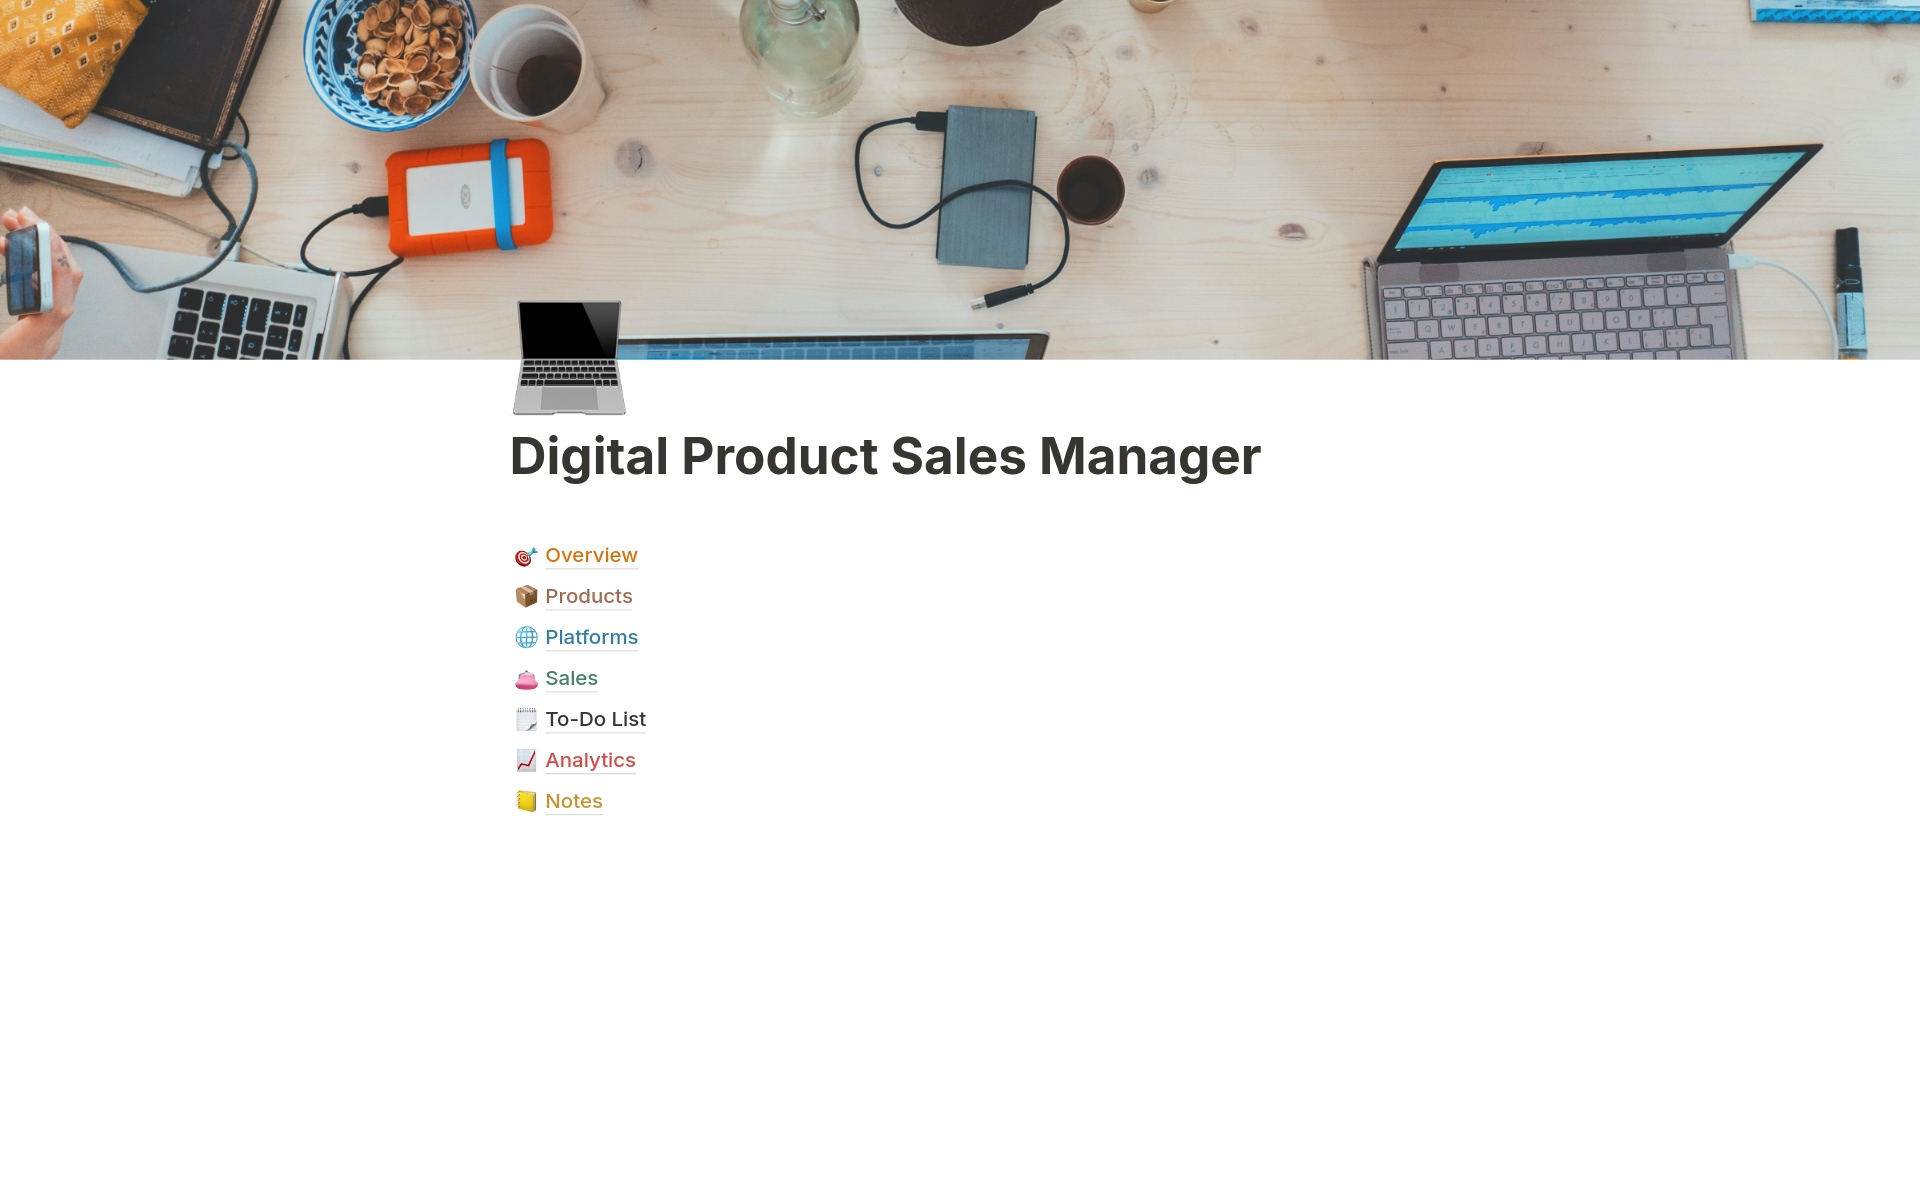 Elevate your digital sales game with our Notion template. Track products, analyze sales, and optimize strategies effortlessly. Ideal for creators of ebooks, courses, and more. 

Get organized and profitable today!